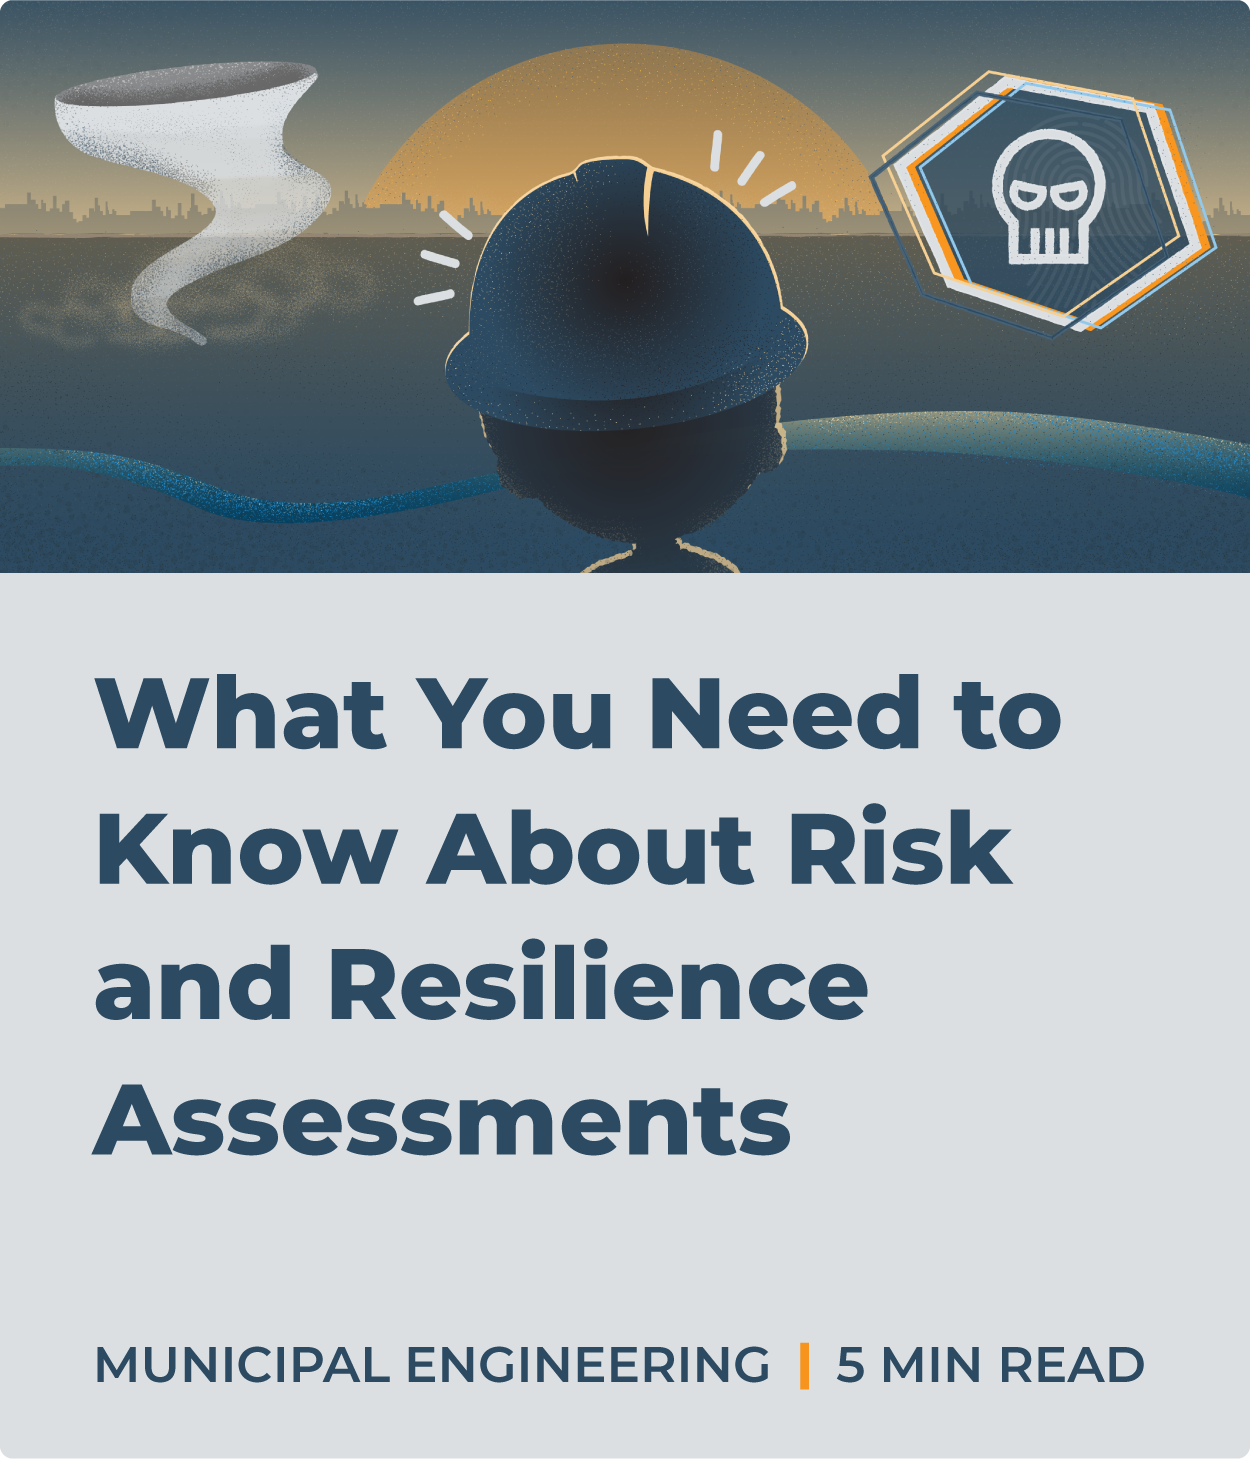 What You Need to Know About Risk and Resilience Assessments